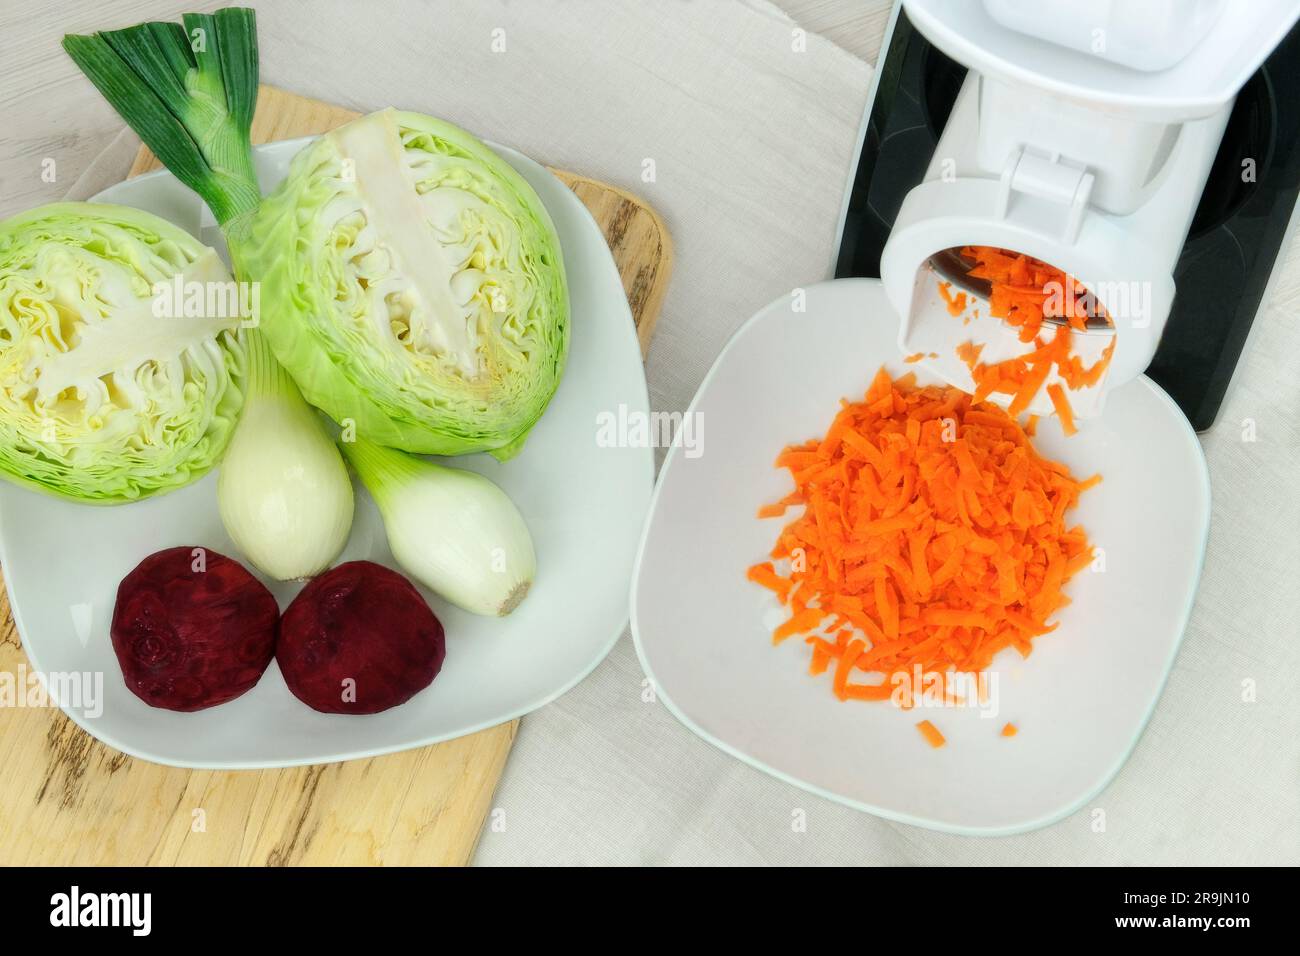 https://c8.alamy.com/comp/2R9JN10/carrots-in-a-vegetable-cutter-on-kitchen-table-chopped-carrots-is-falling-into-a-bowl-homemade-healthy-food-2R9JN10.jpg